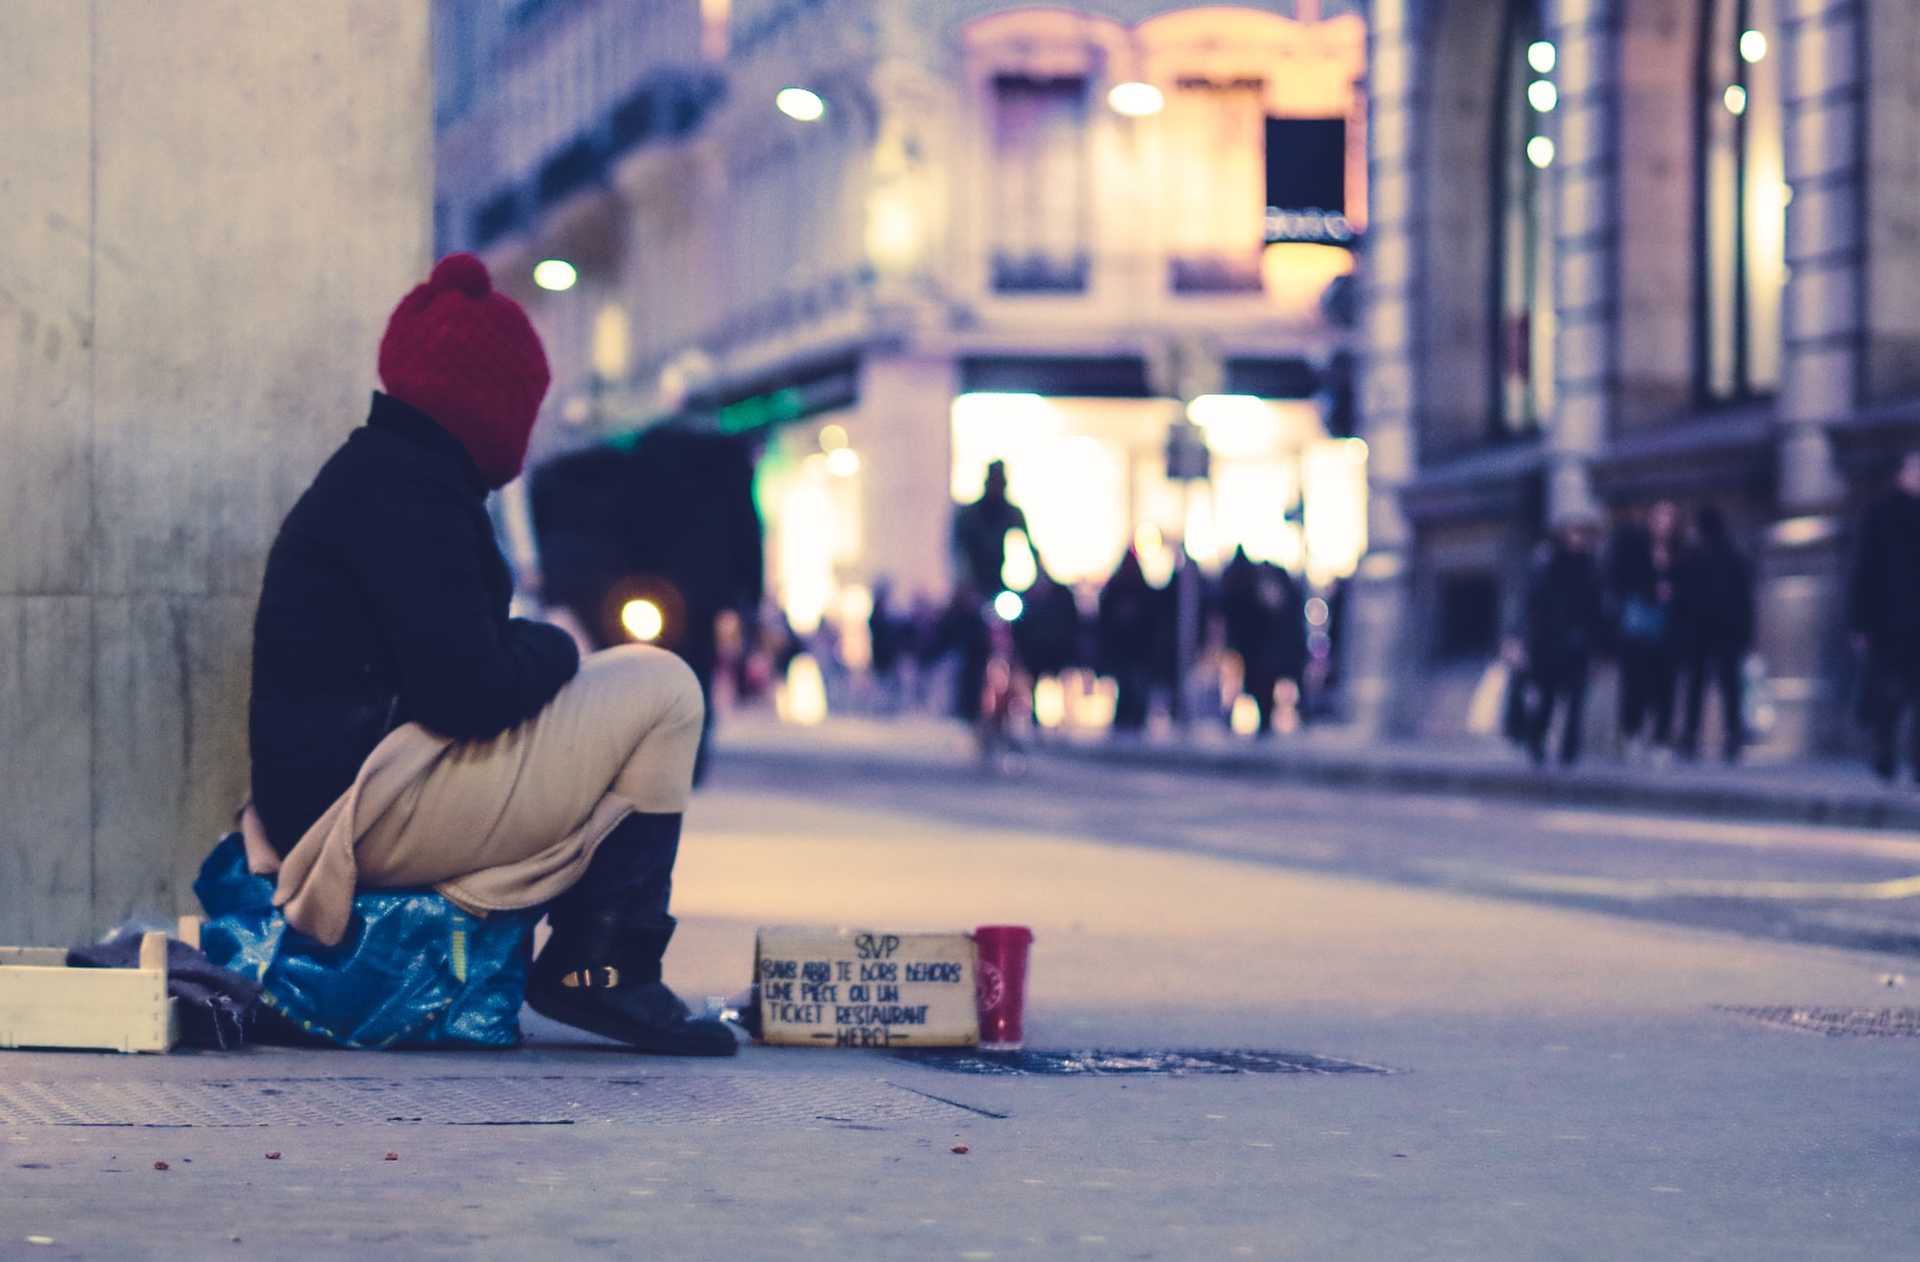 A homeless person sits on a street corner.